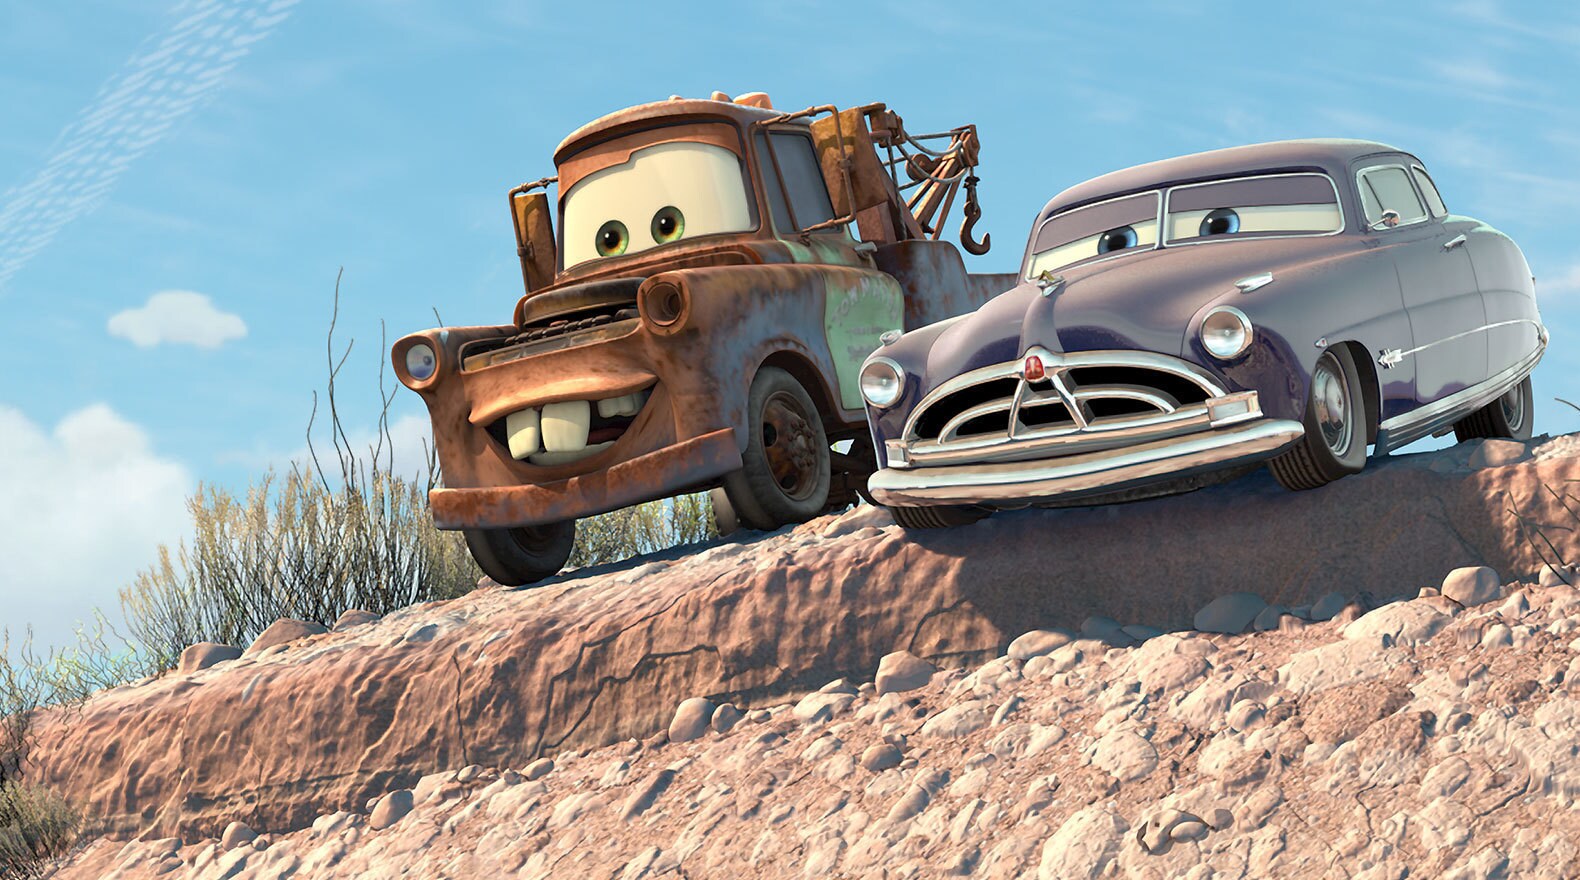 Mater always has his tow-cable, just in case he needs to go "fishin'."